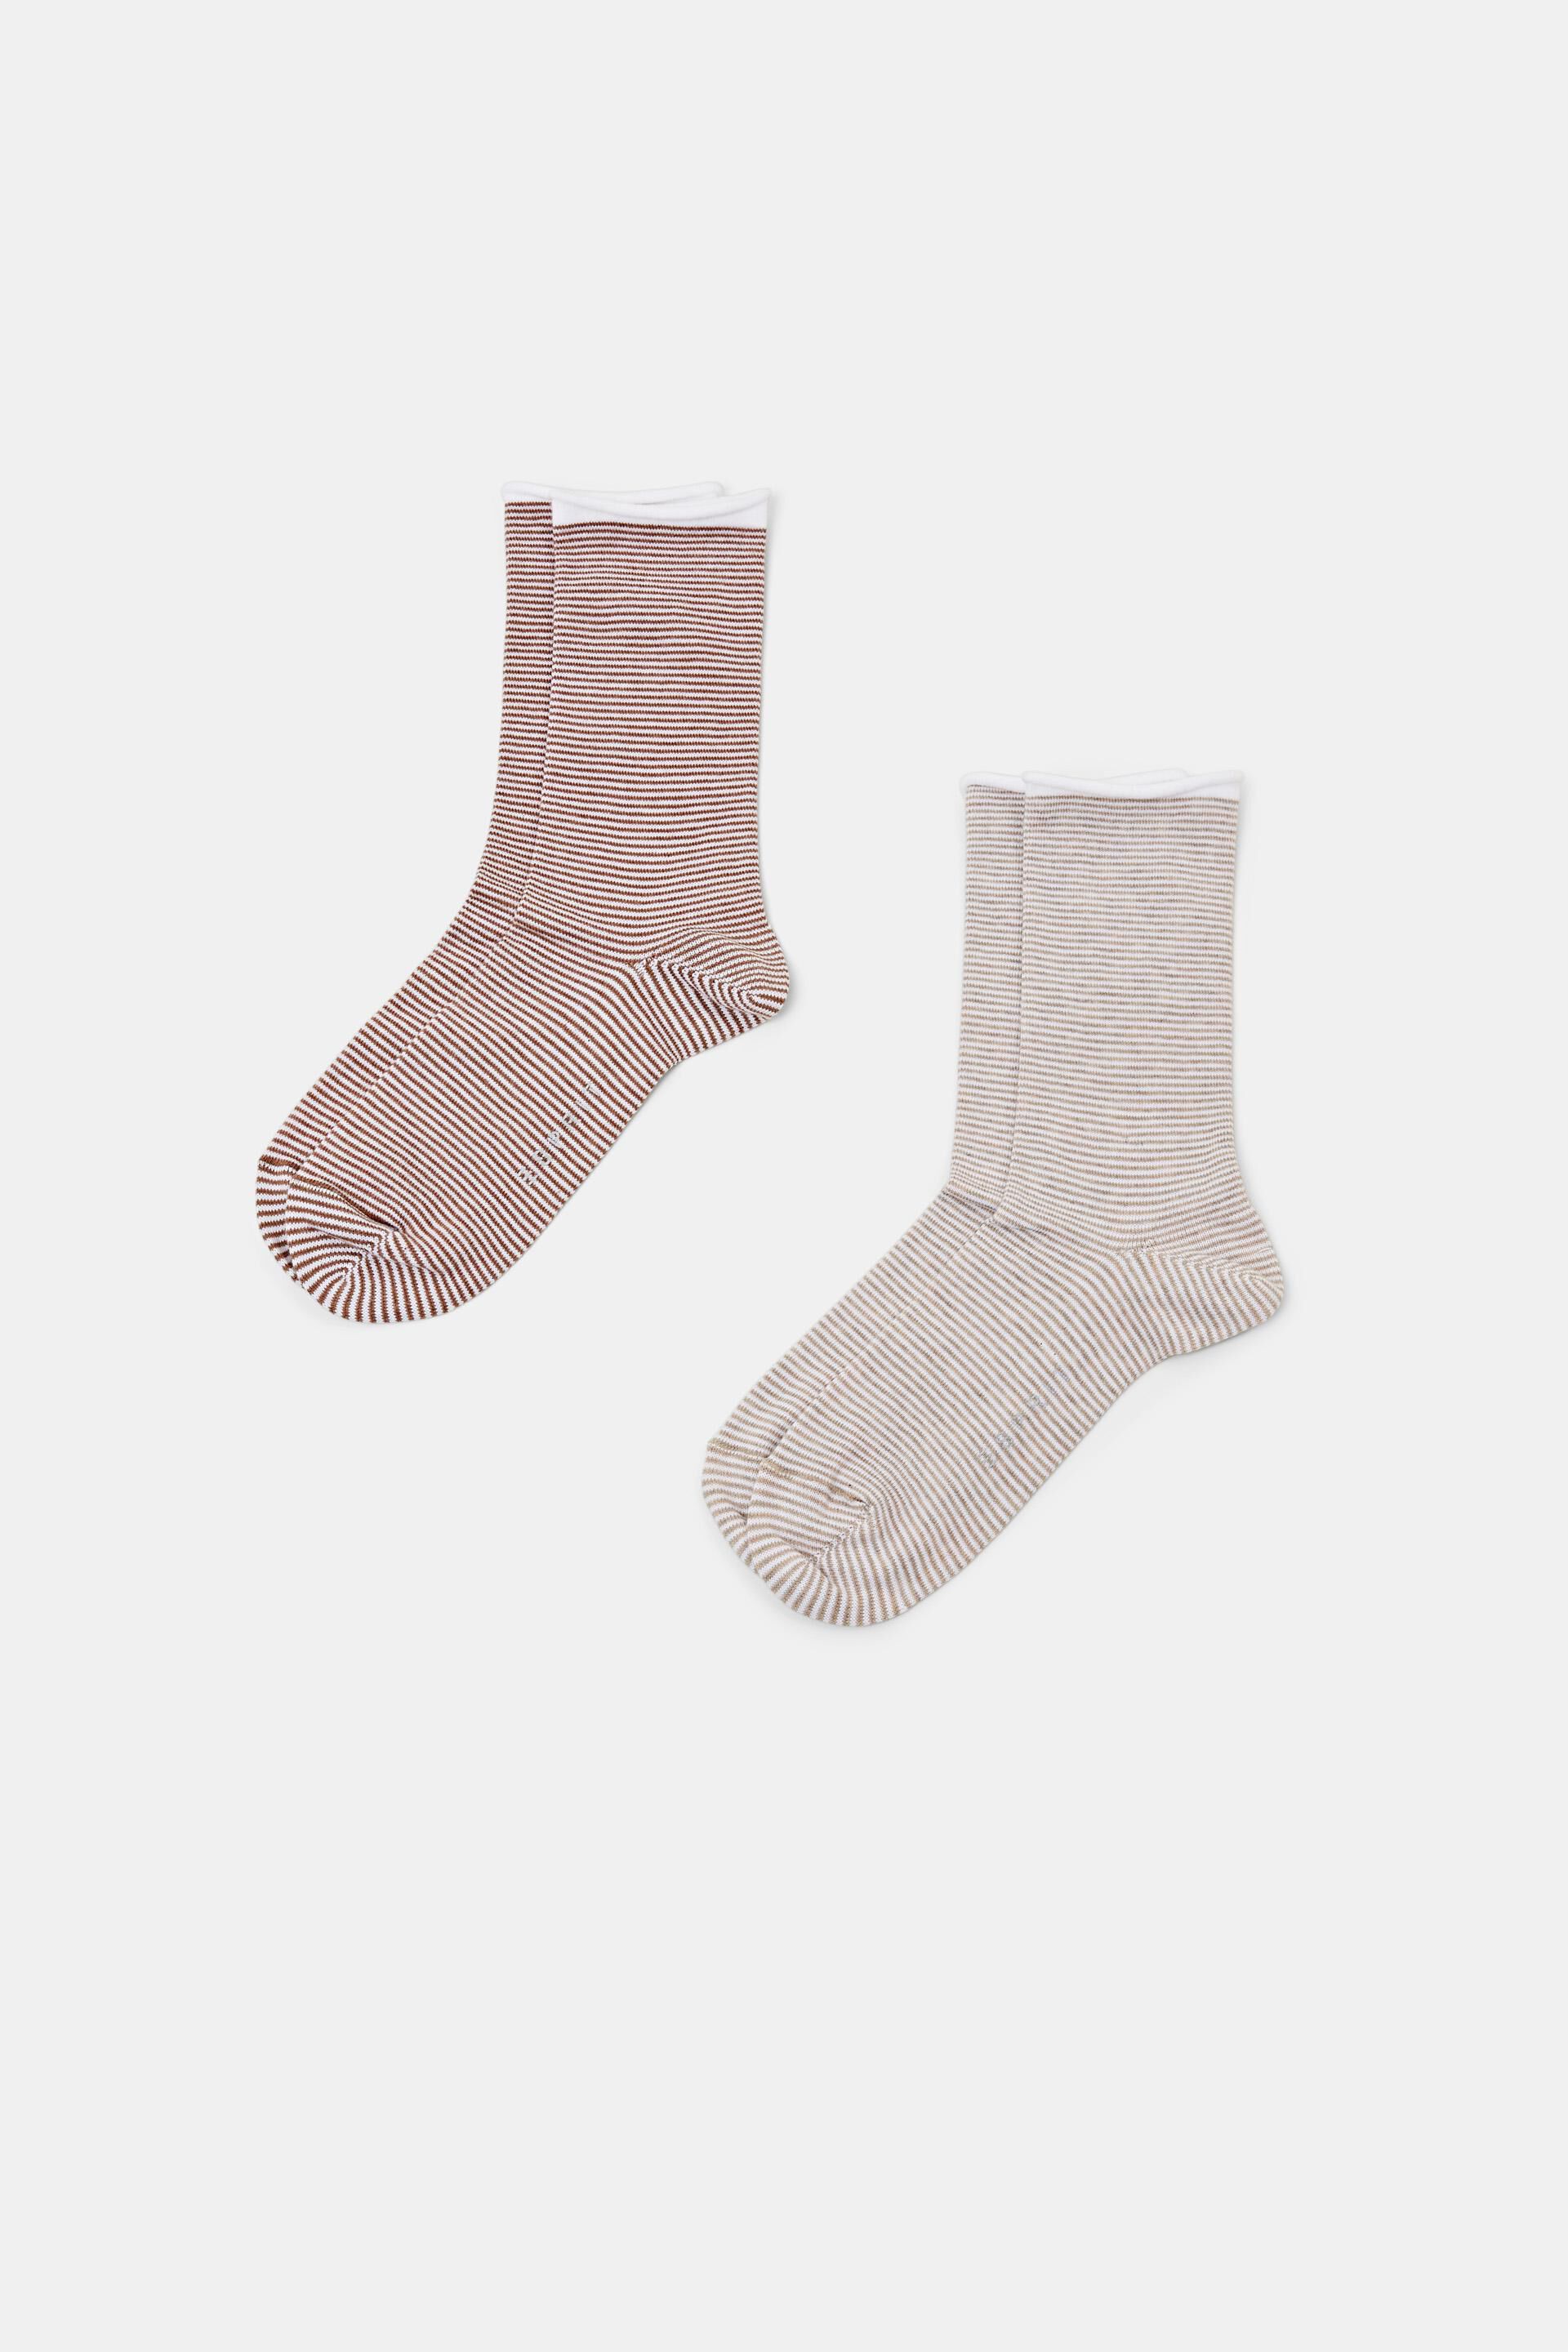 Esprit organic cotton with rolled socks cuffs, Striped